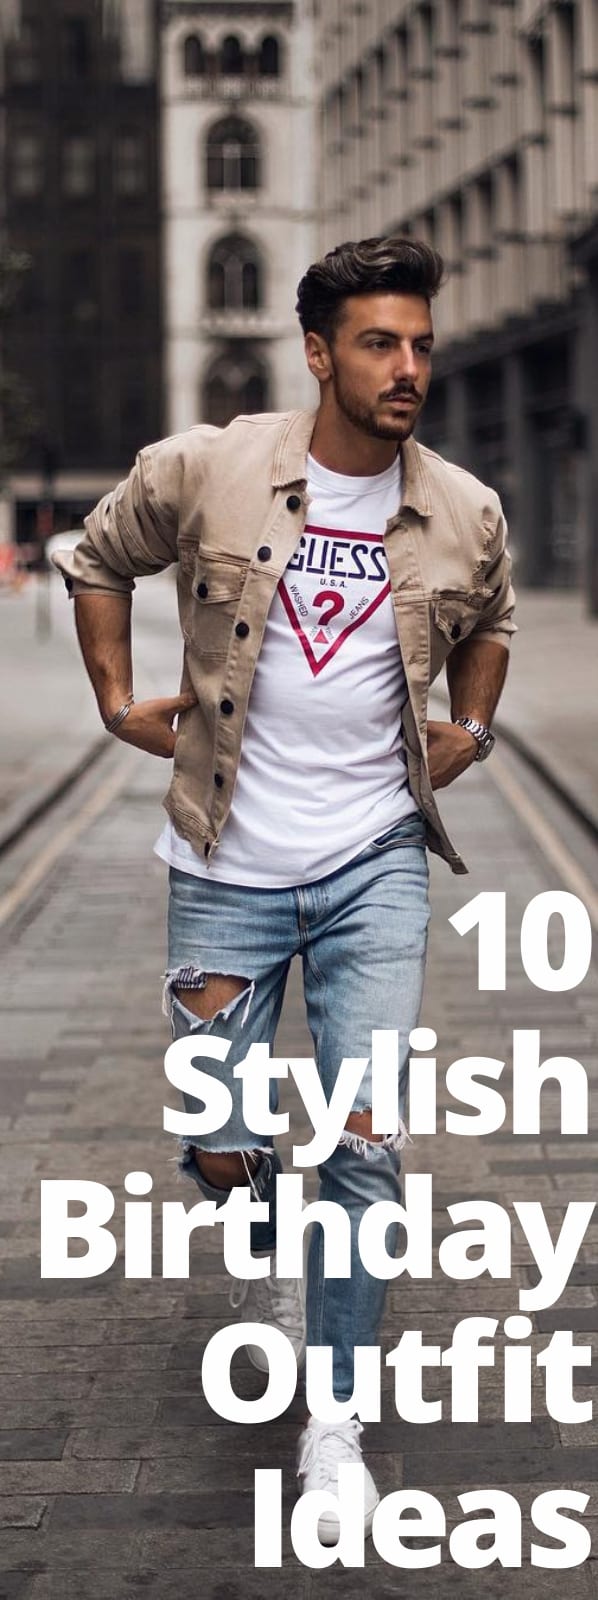 10 Stylish Birthday Outfit Ideas for men